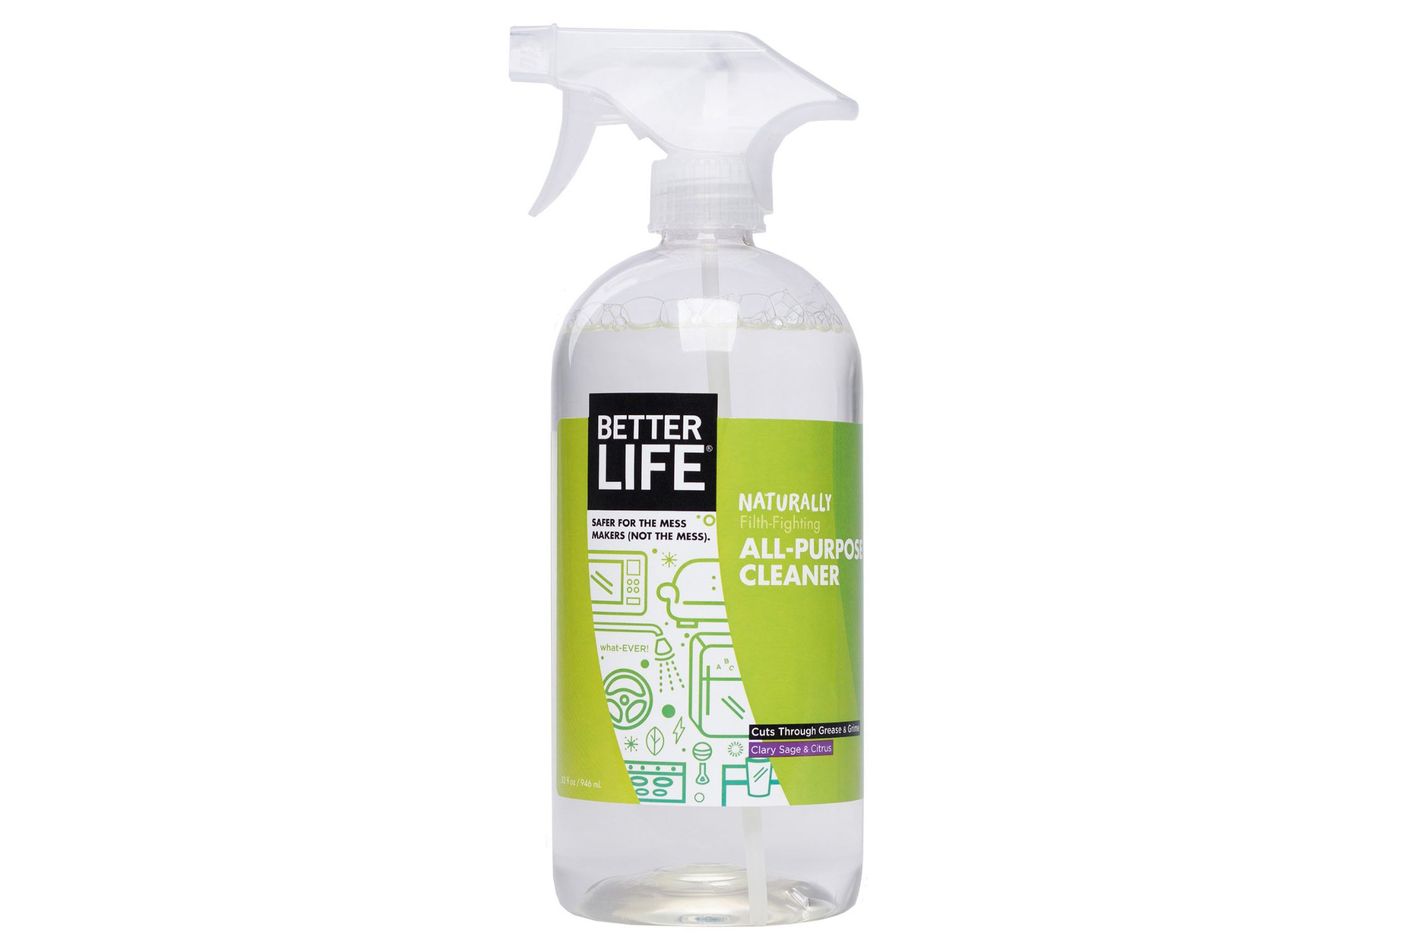 https://pyxis.nymag.com/v1/imgs/41f/1e5/f8acda18c25a195c446364b4ee52d7eb79-better-life-cleaner.2x.h473.w710.jpg